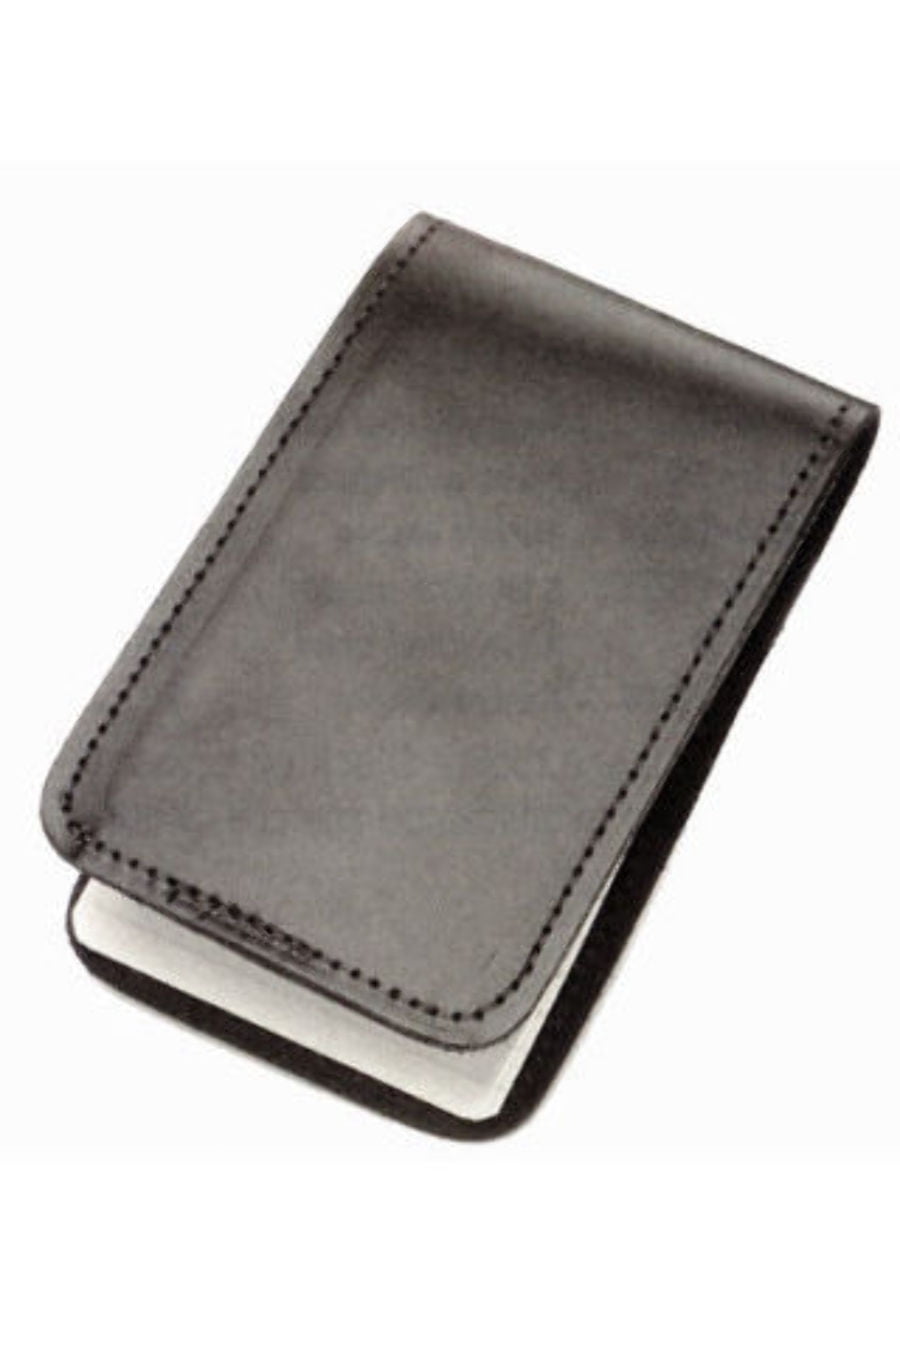 3x5 Pocket Memo Pads Book Cover for Business Profes.. Mini Notepad Holder Set 86156220066 